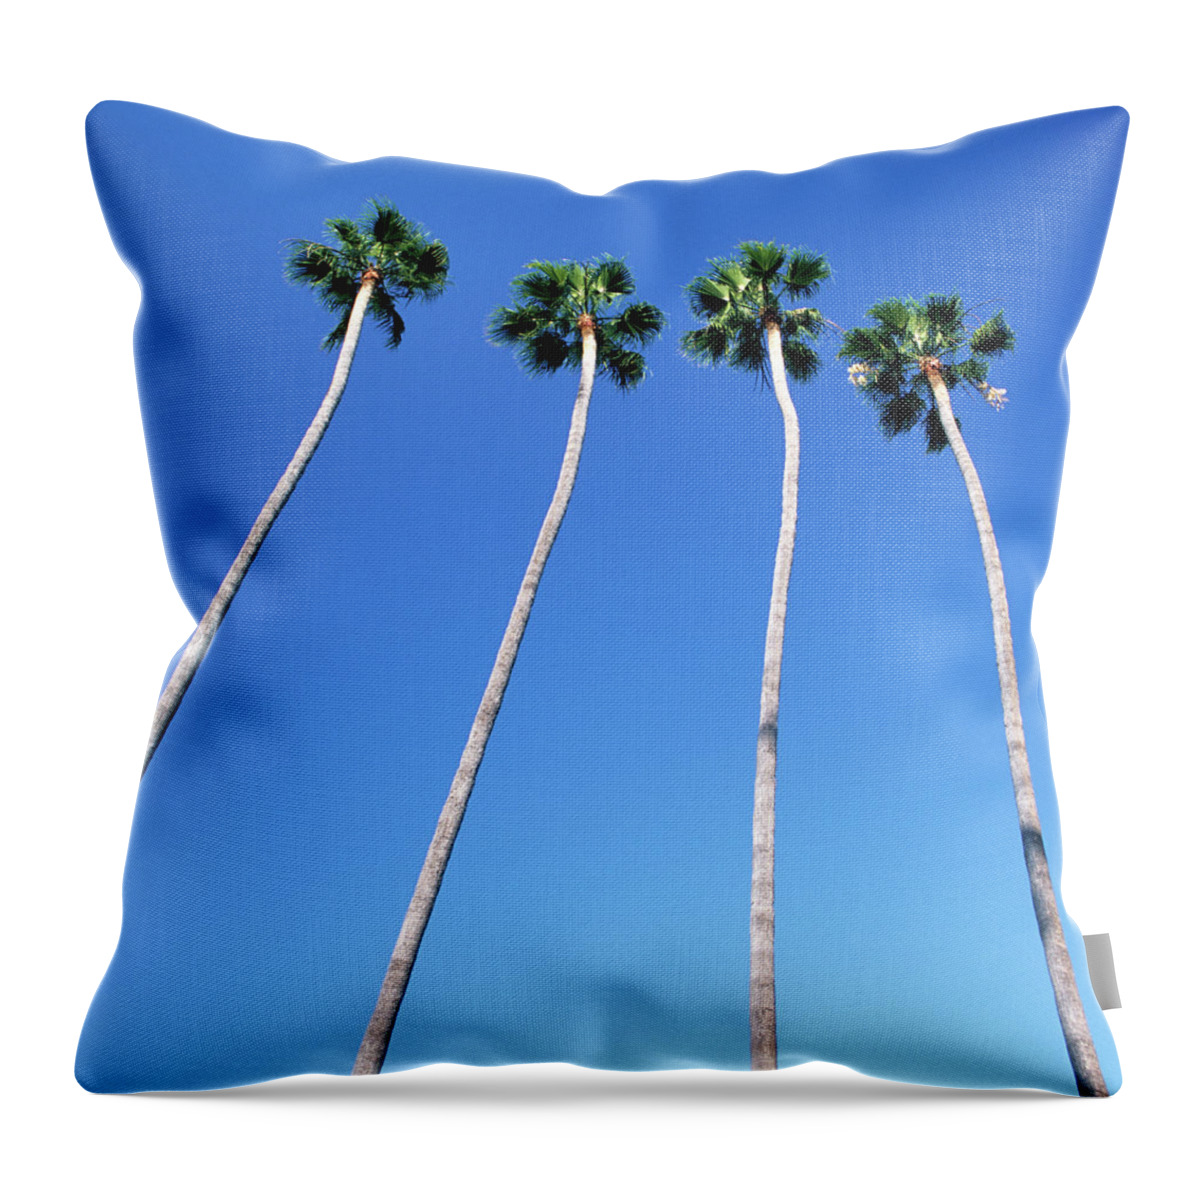 Hollywood Boulevard Throw Pillow featuring the photograph Palm Trees Lining Hollywood Boulevard by Hisham Ibrahim